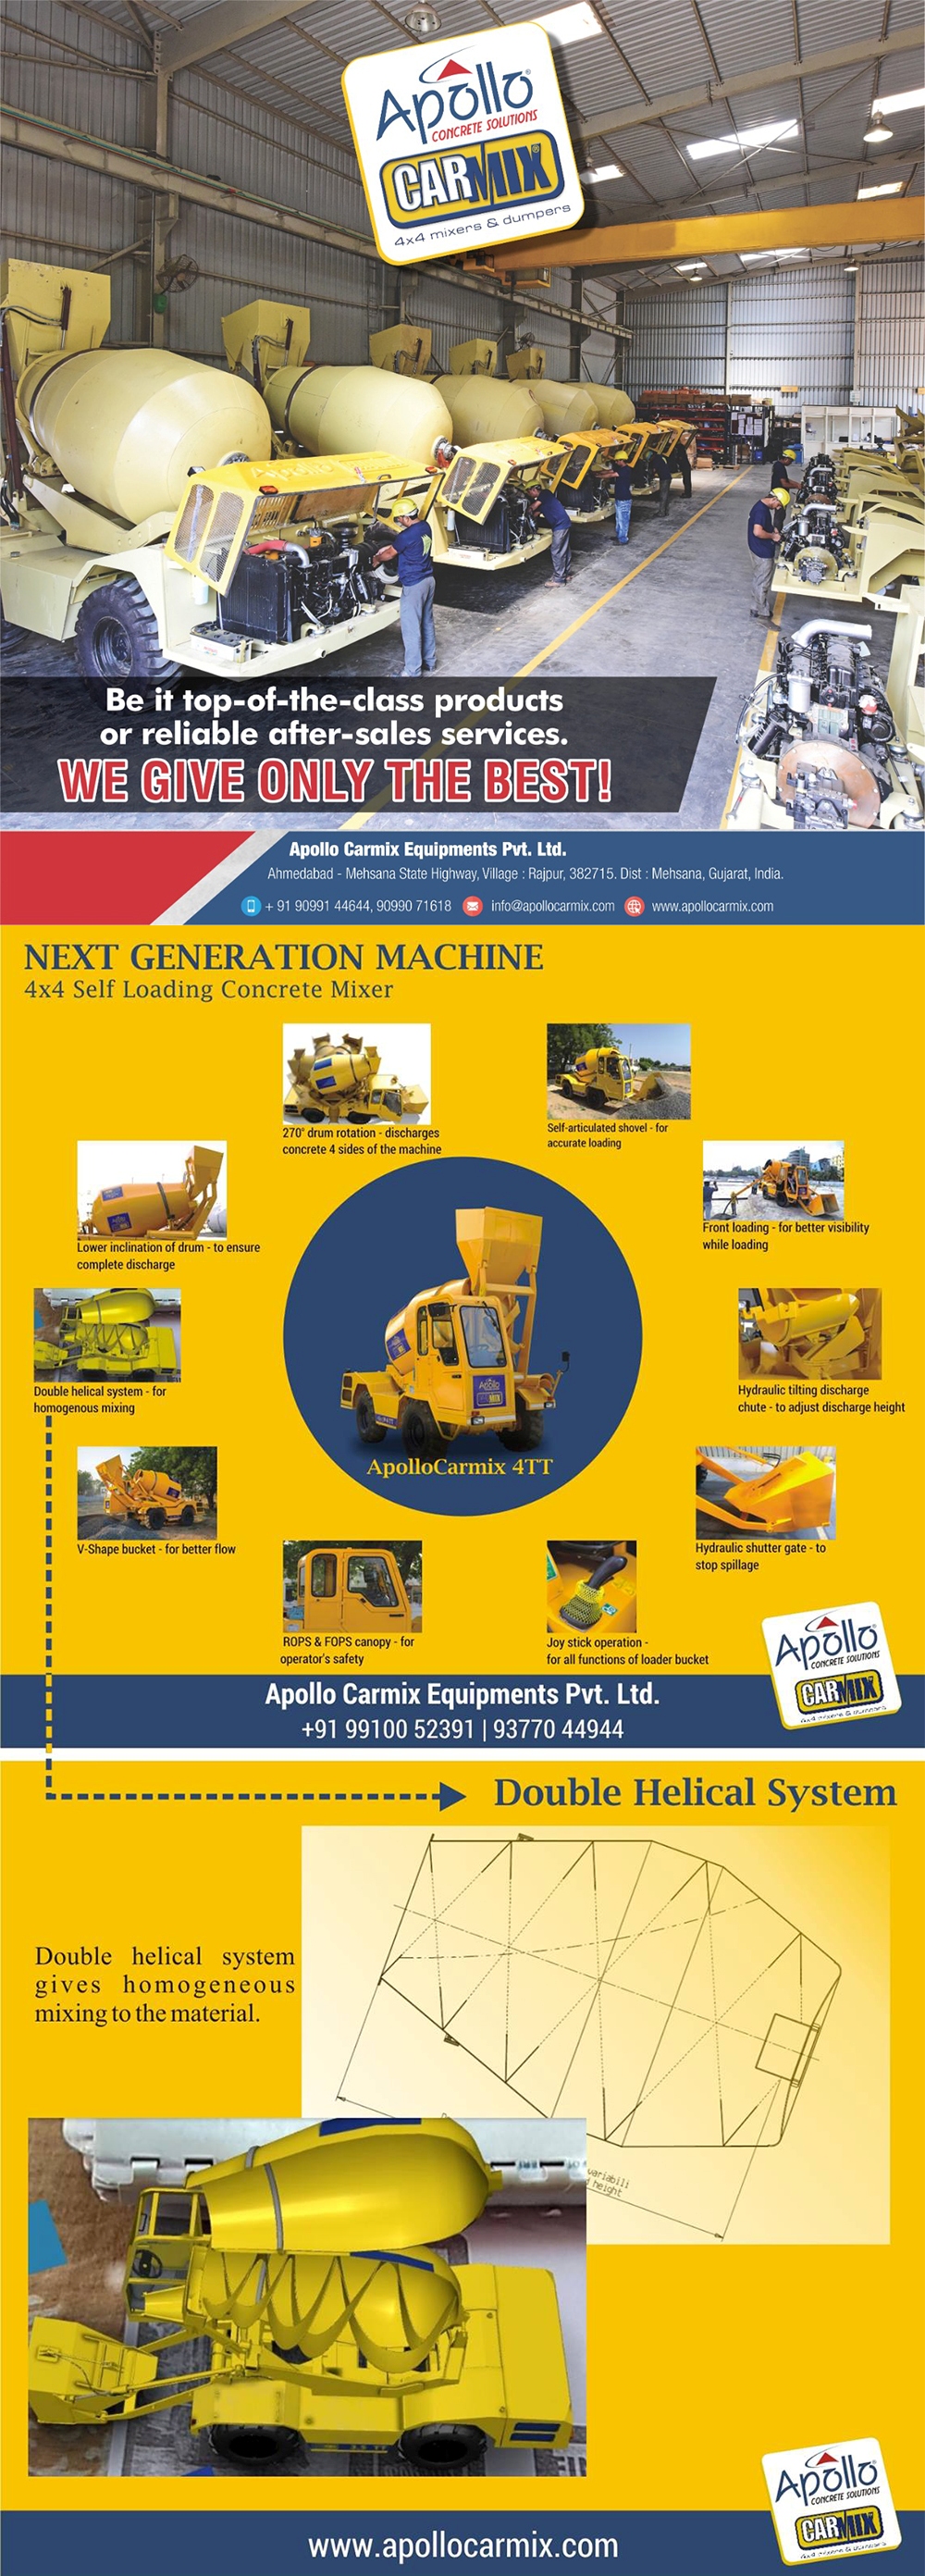 rising demand of self loading concrete mixers in african countries